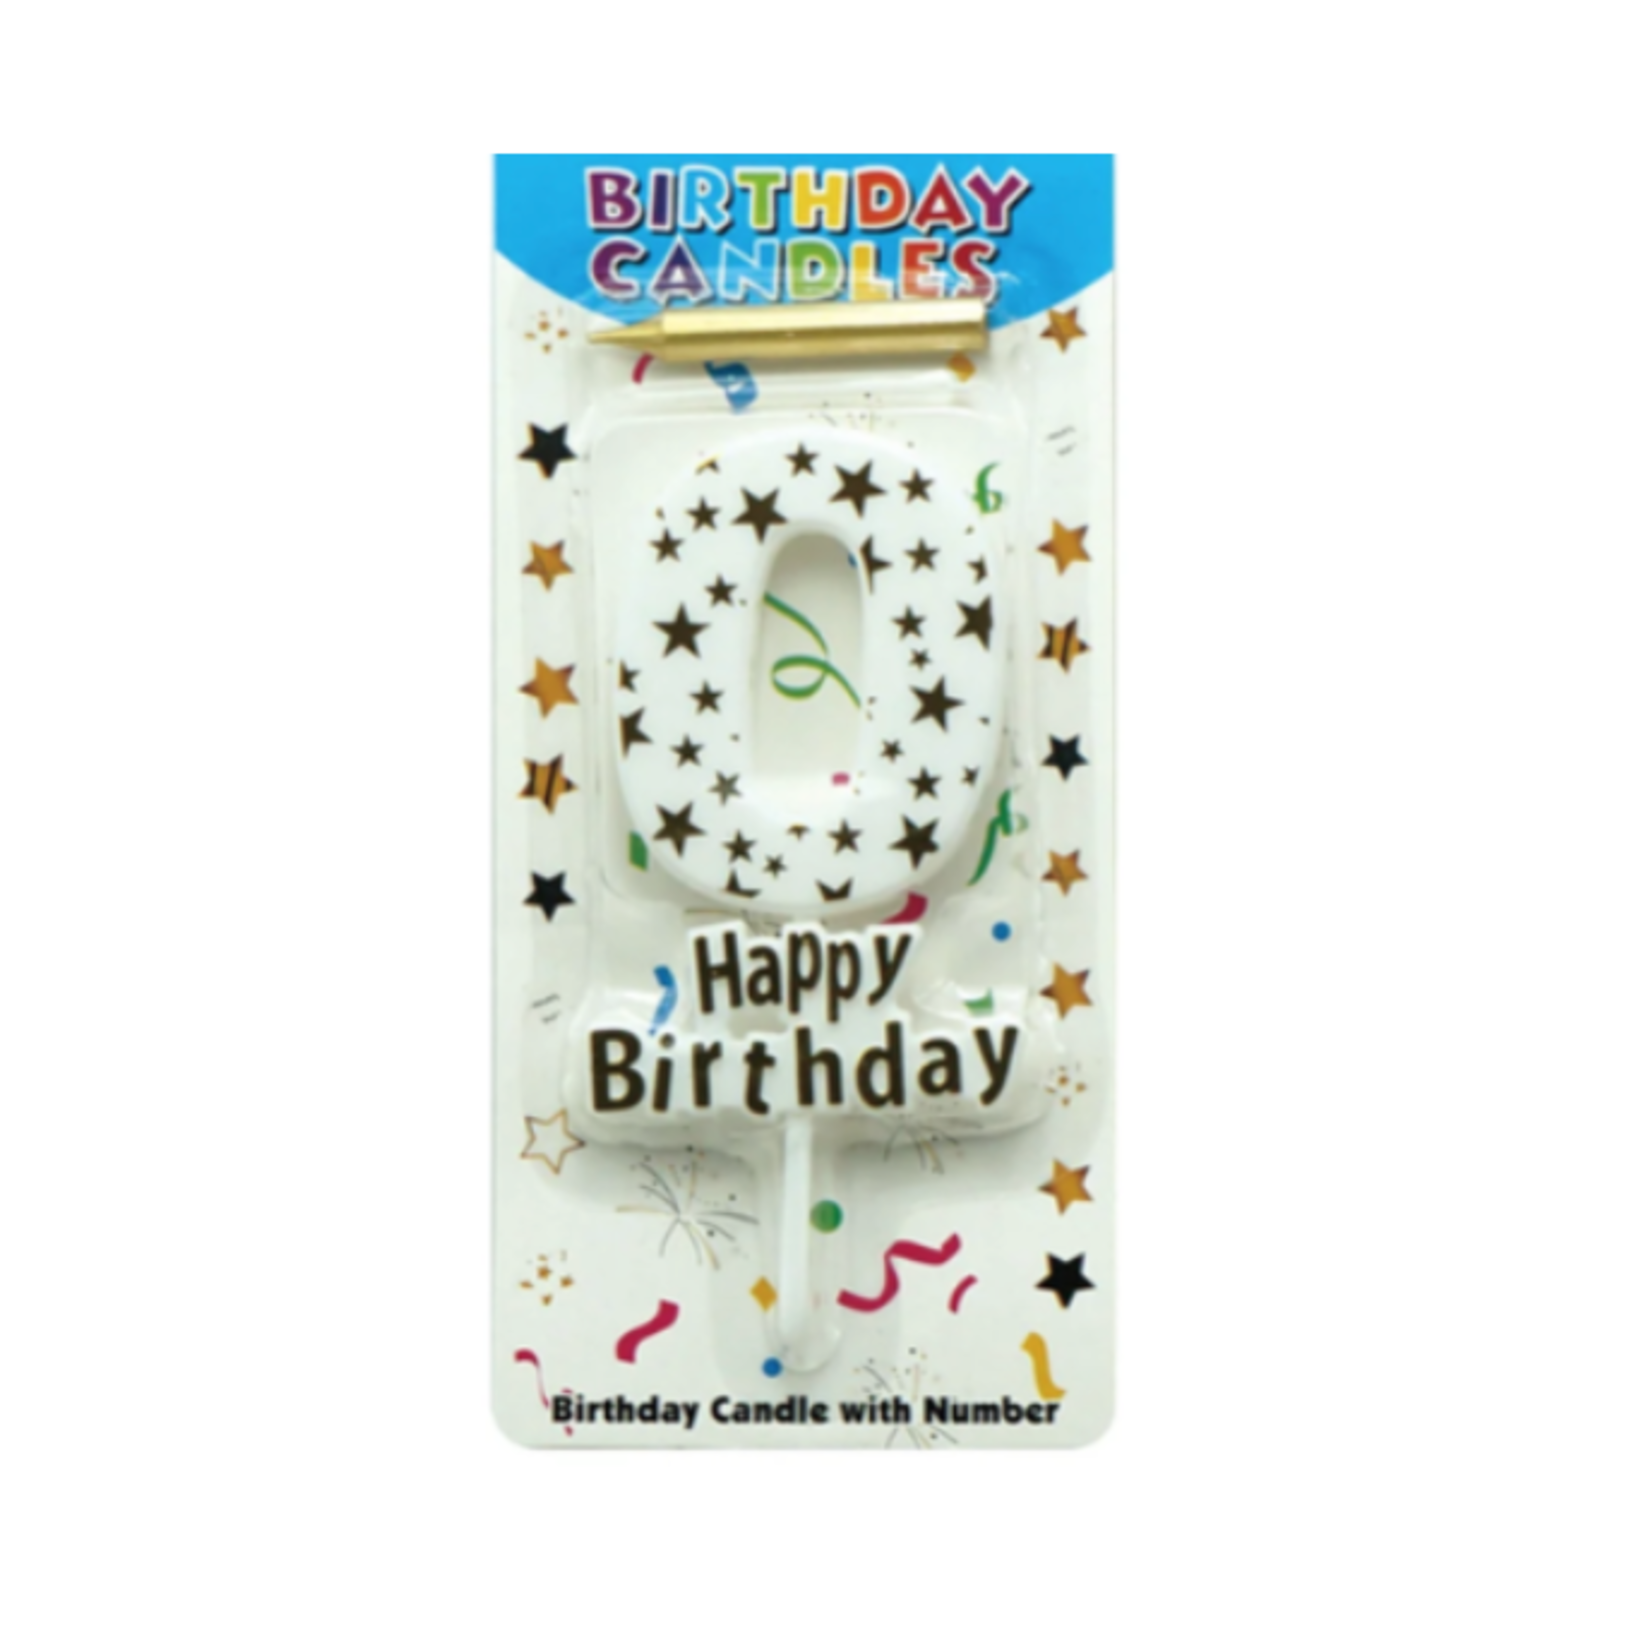 HAPPY BIRTHDAY CANDLE #0 WHITE WITH GOLD STARS